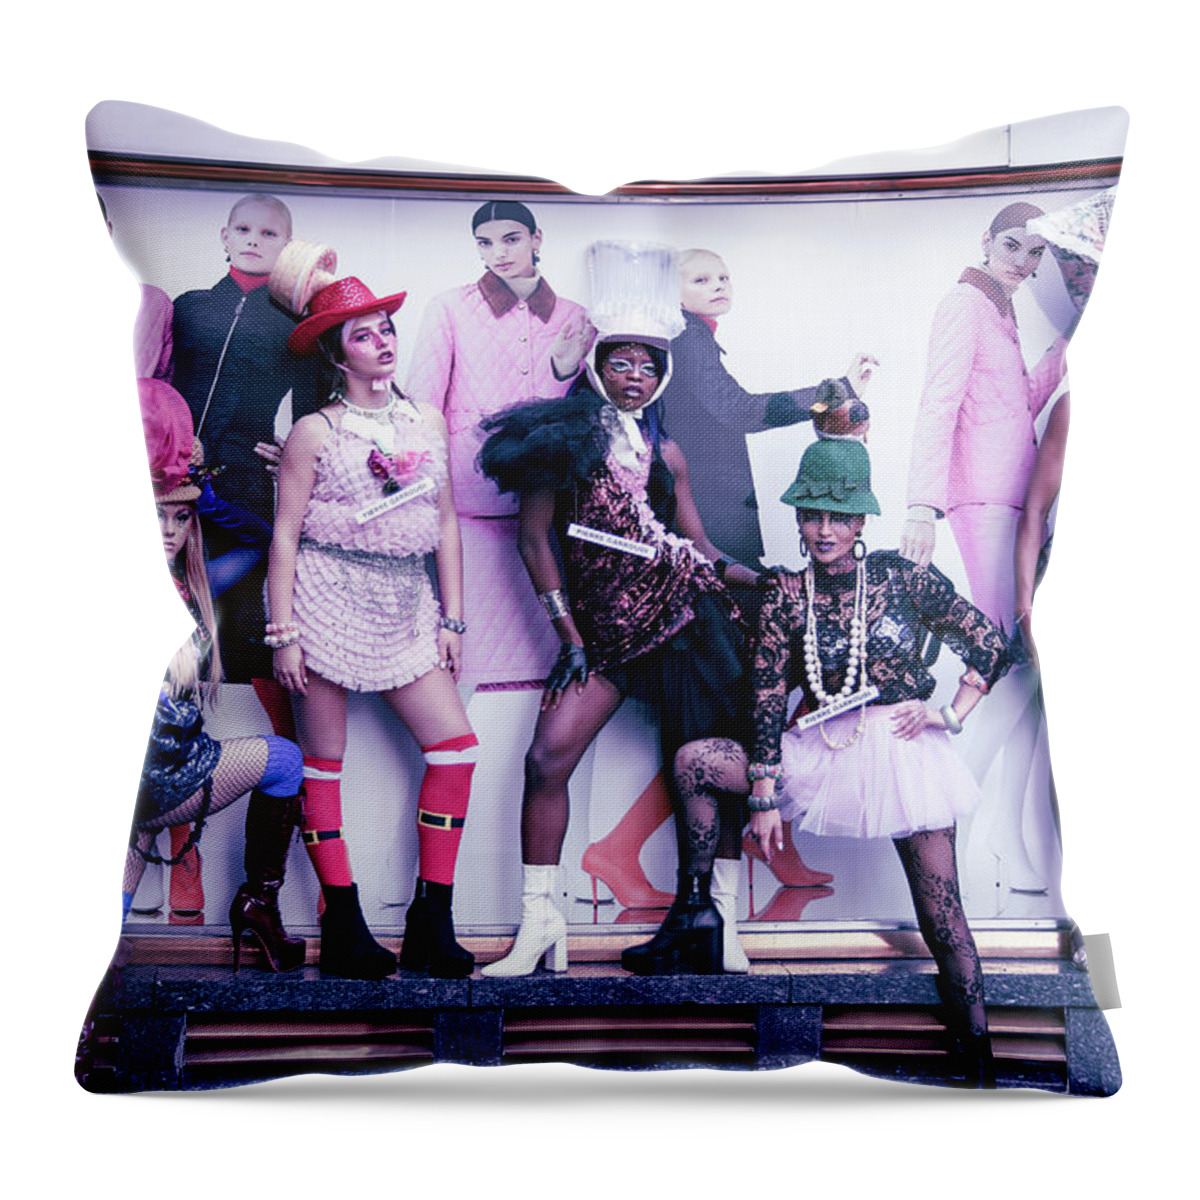 Design Throw Pillow featuring the photograph Fashion flash mob by Andrew Lalchan